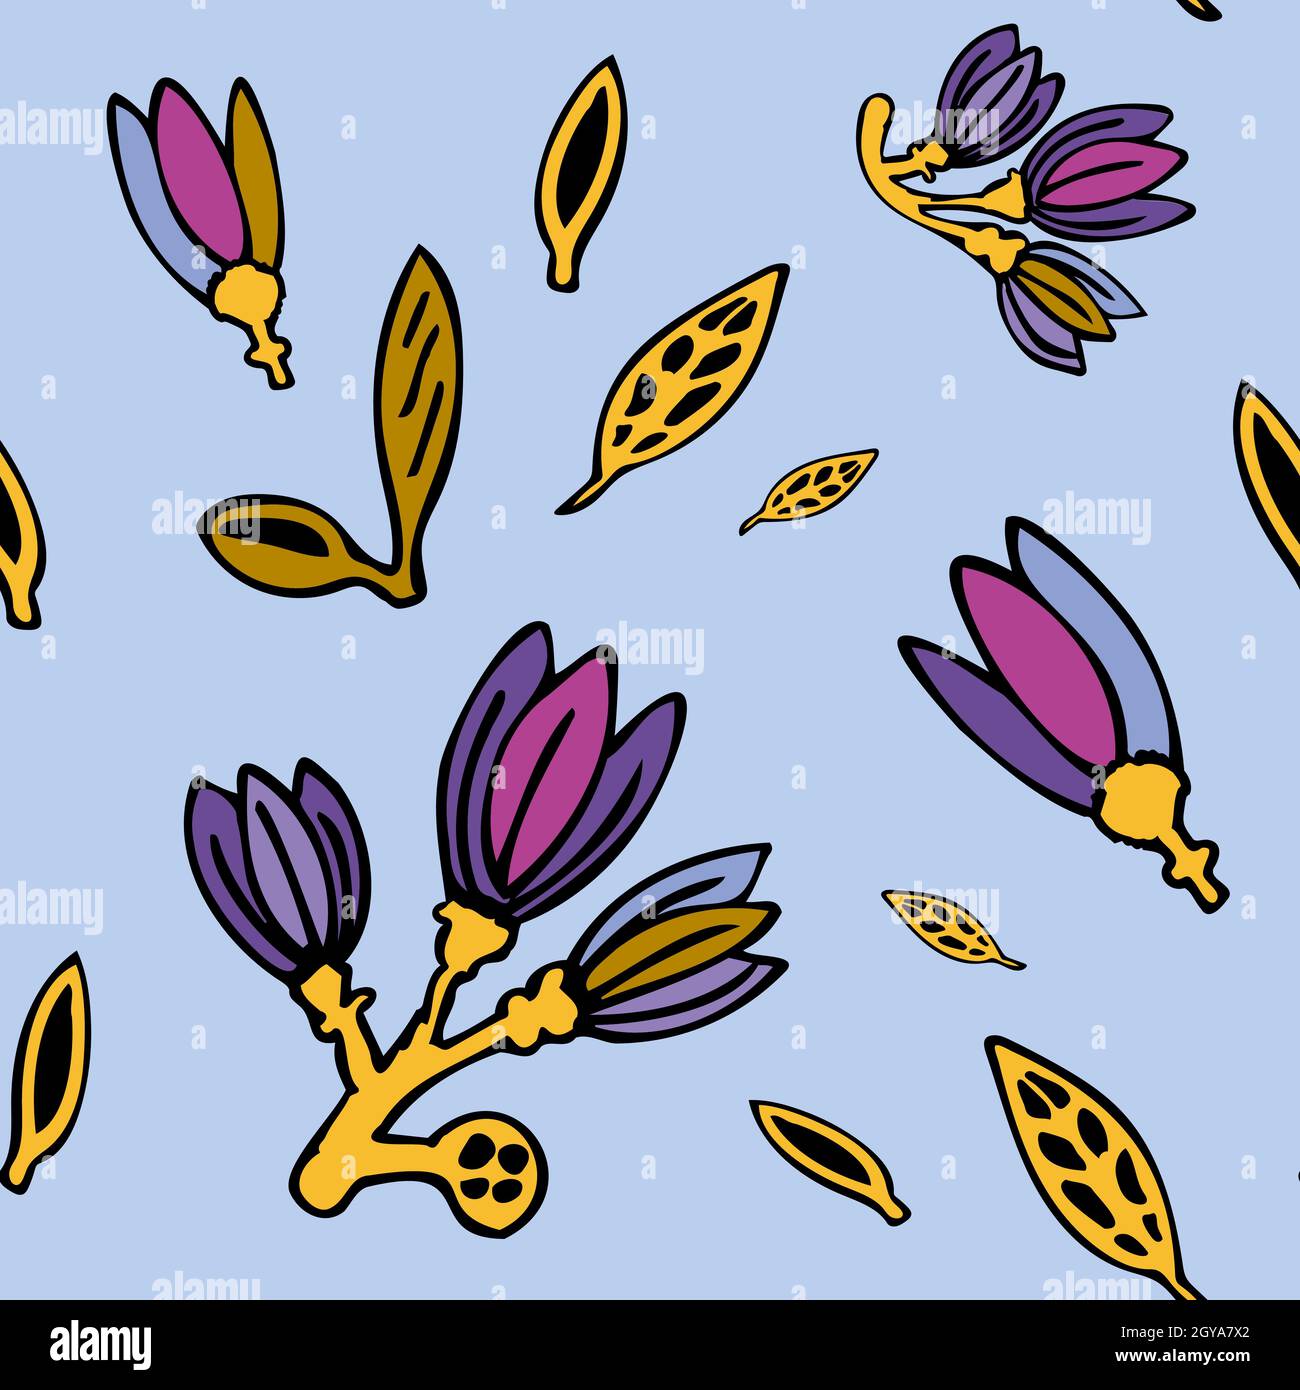 Blue seamless pattern with silhouette of a violet blooming flowers and yellow leaves. Stock Vector